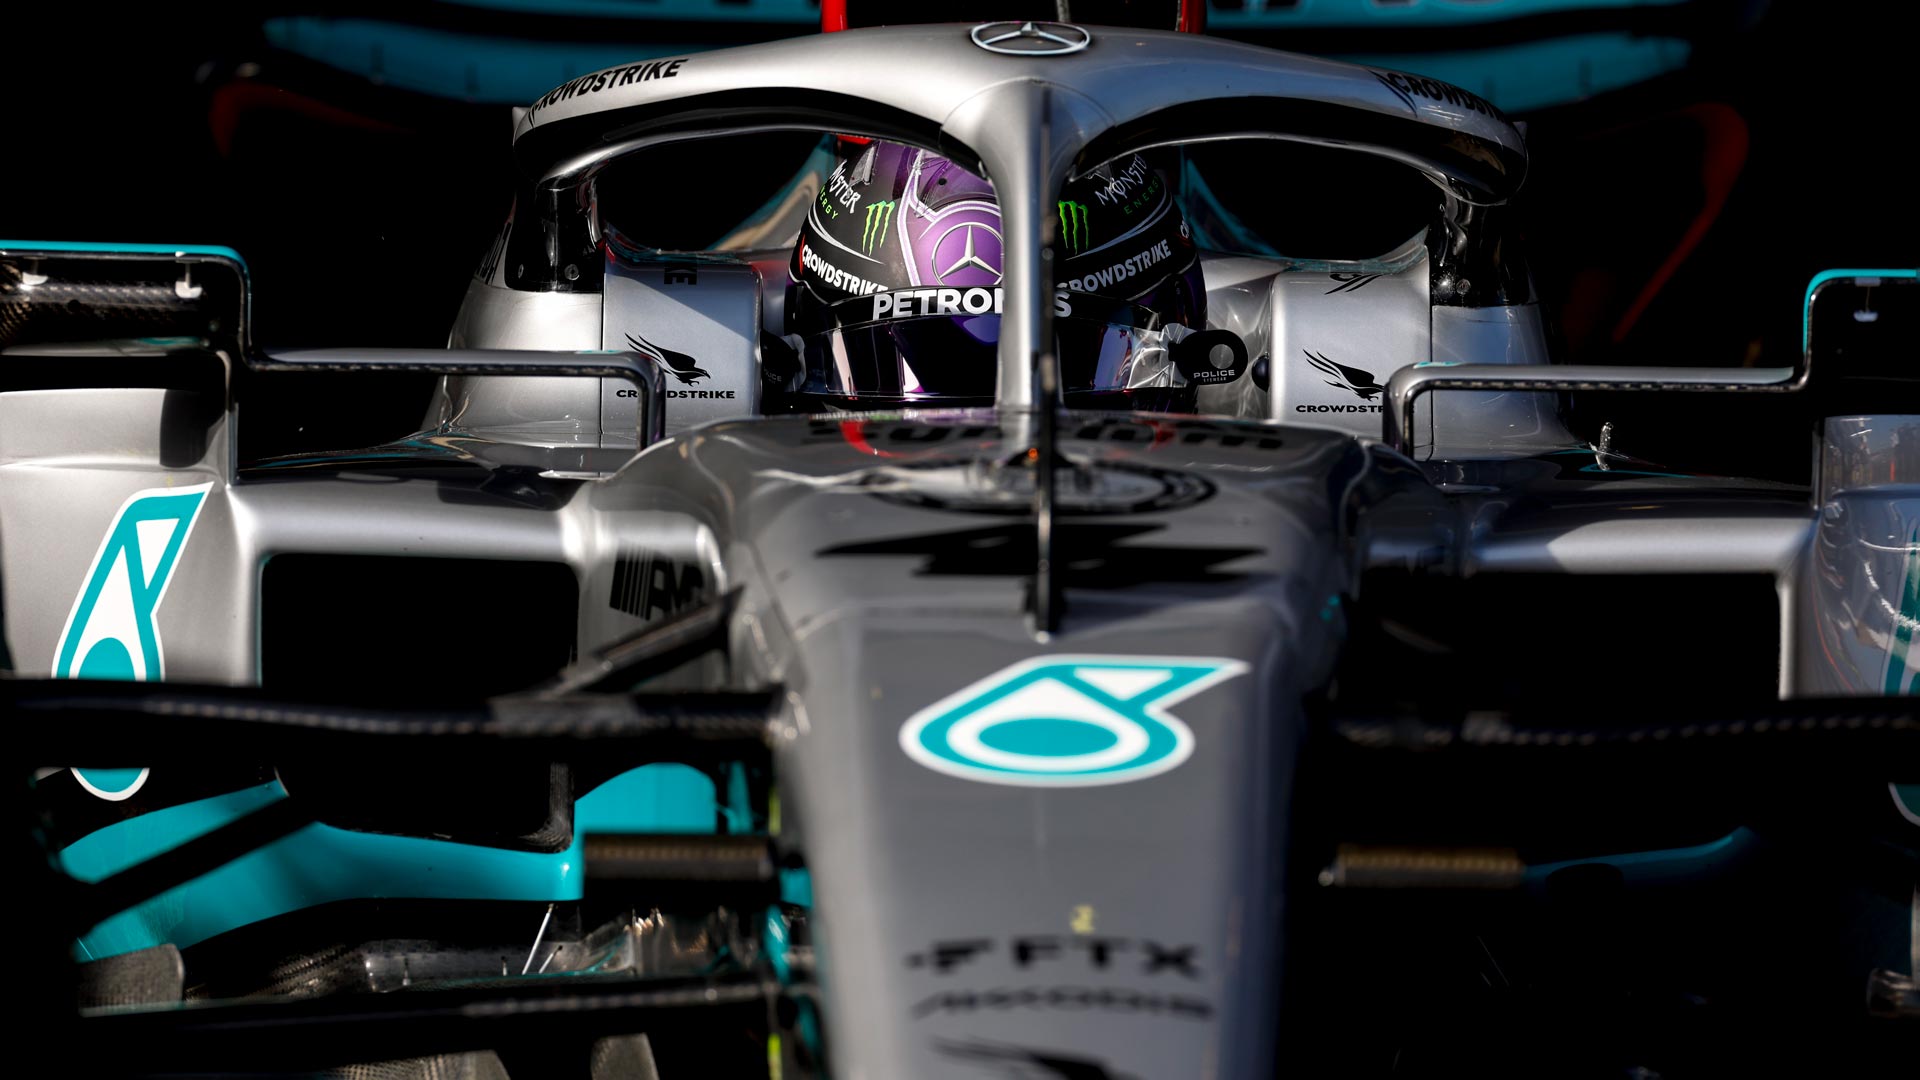 Video: Mercedes provides fascinating information about the engine